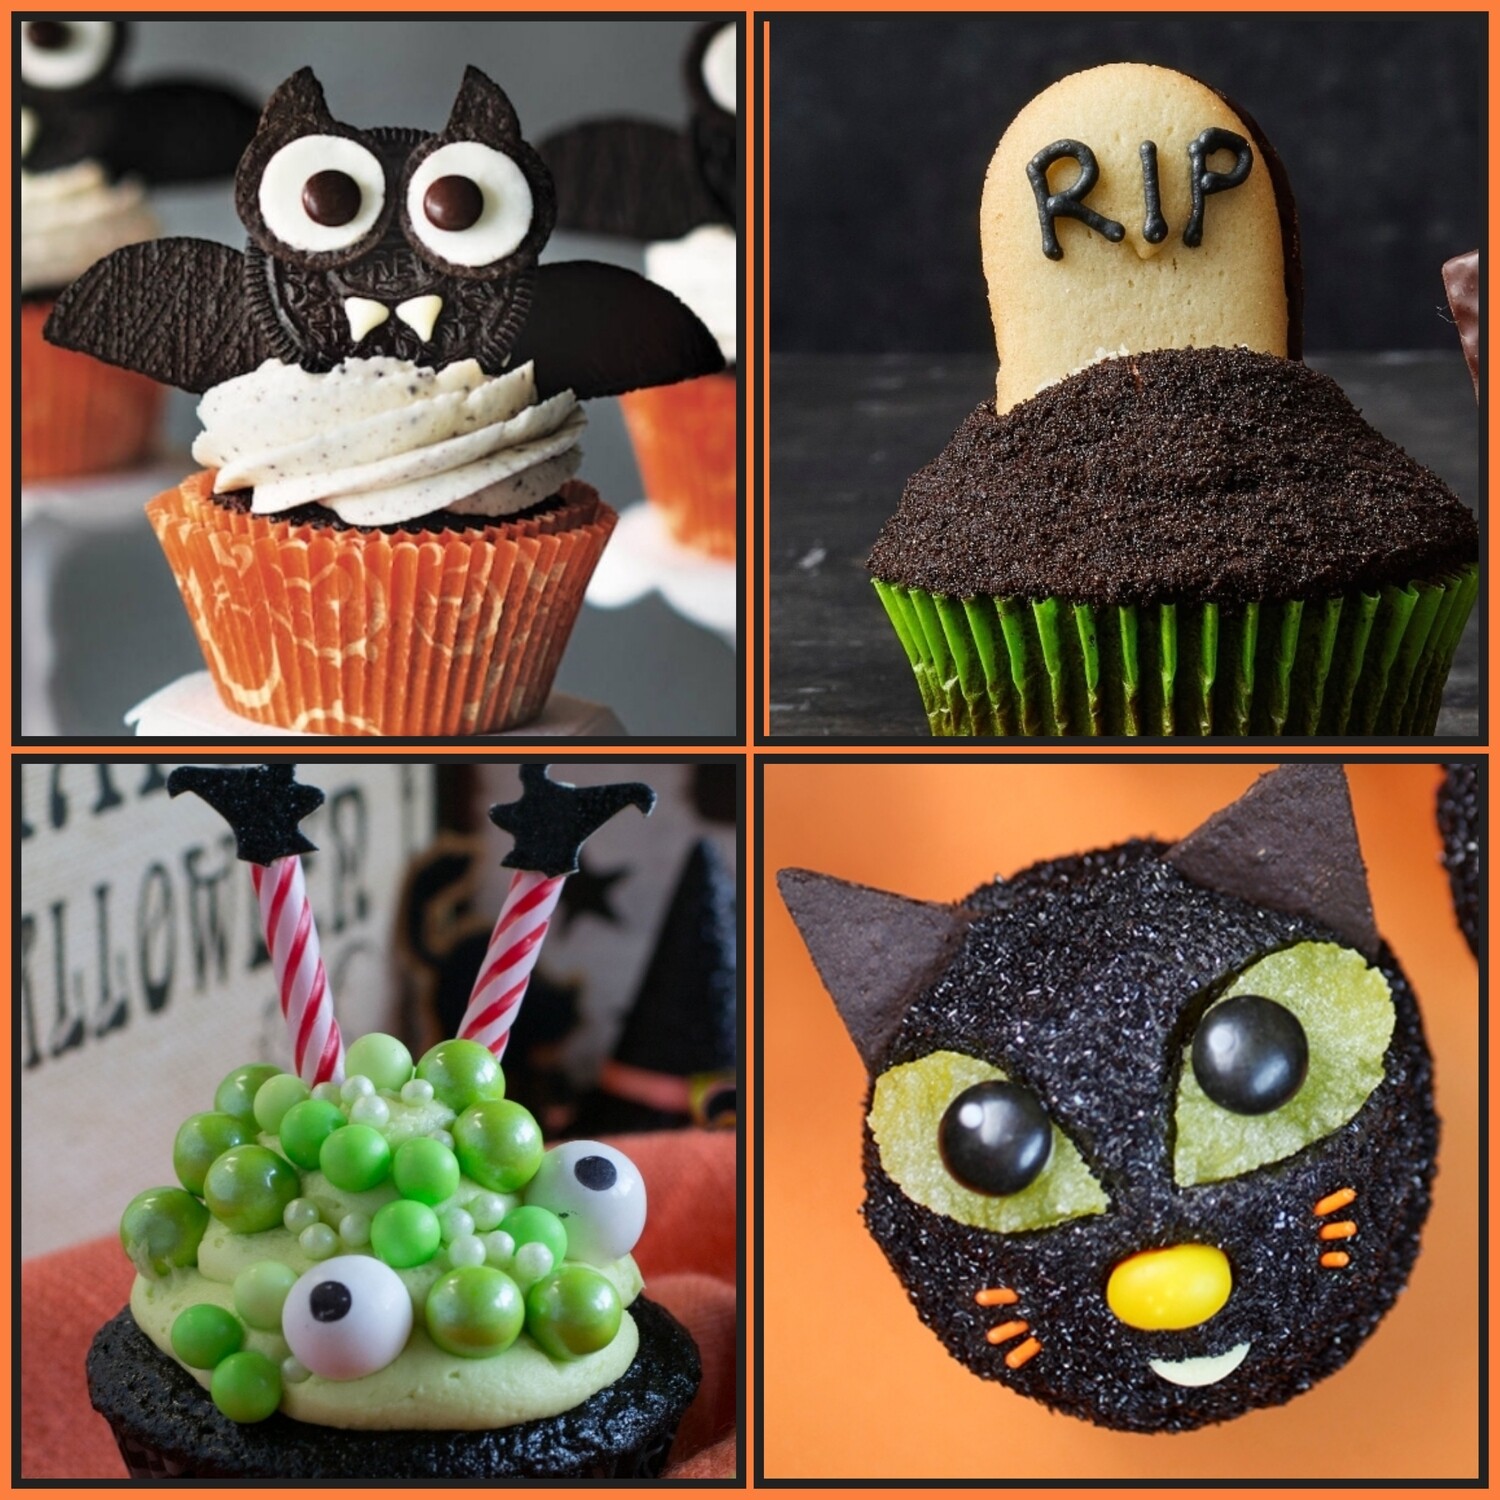 Adult BYOB Halloween Cupcake Decorating Class Sunday October 23rd from 3pm to 5pm